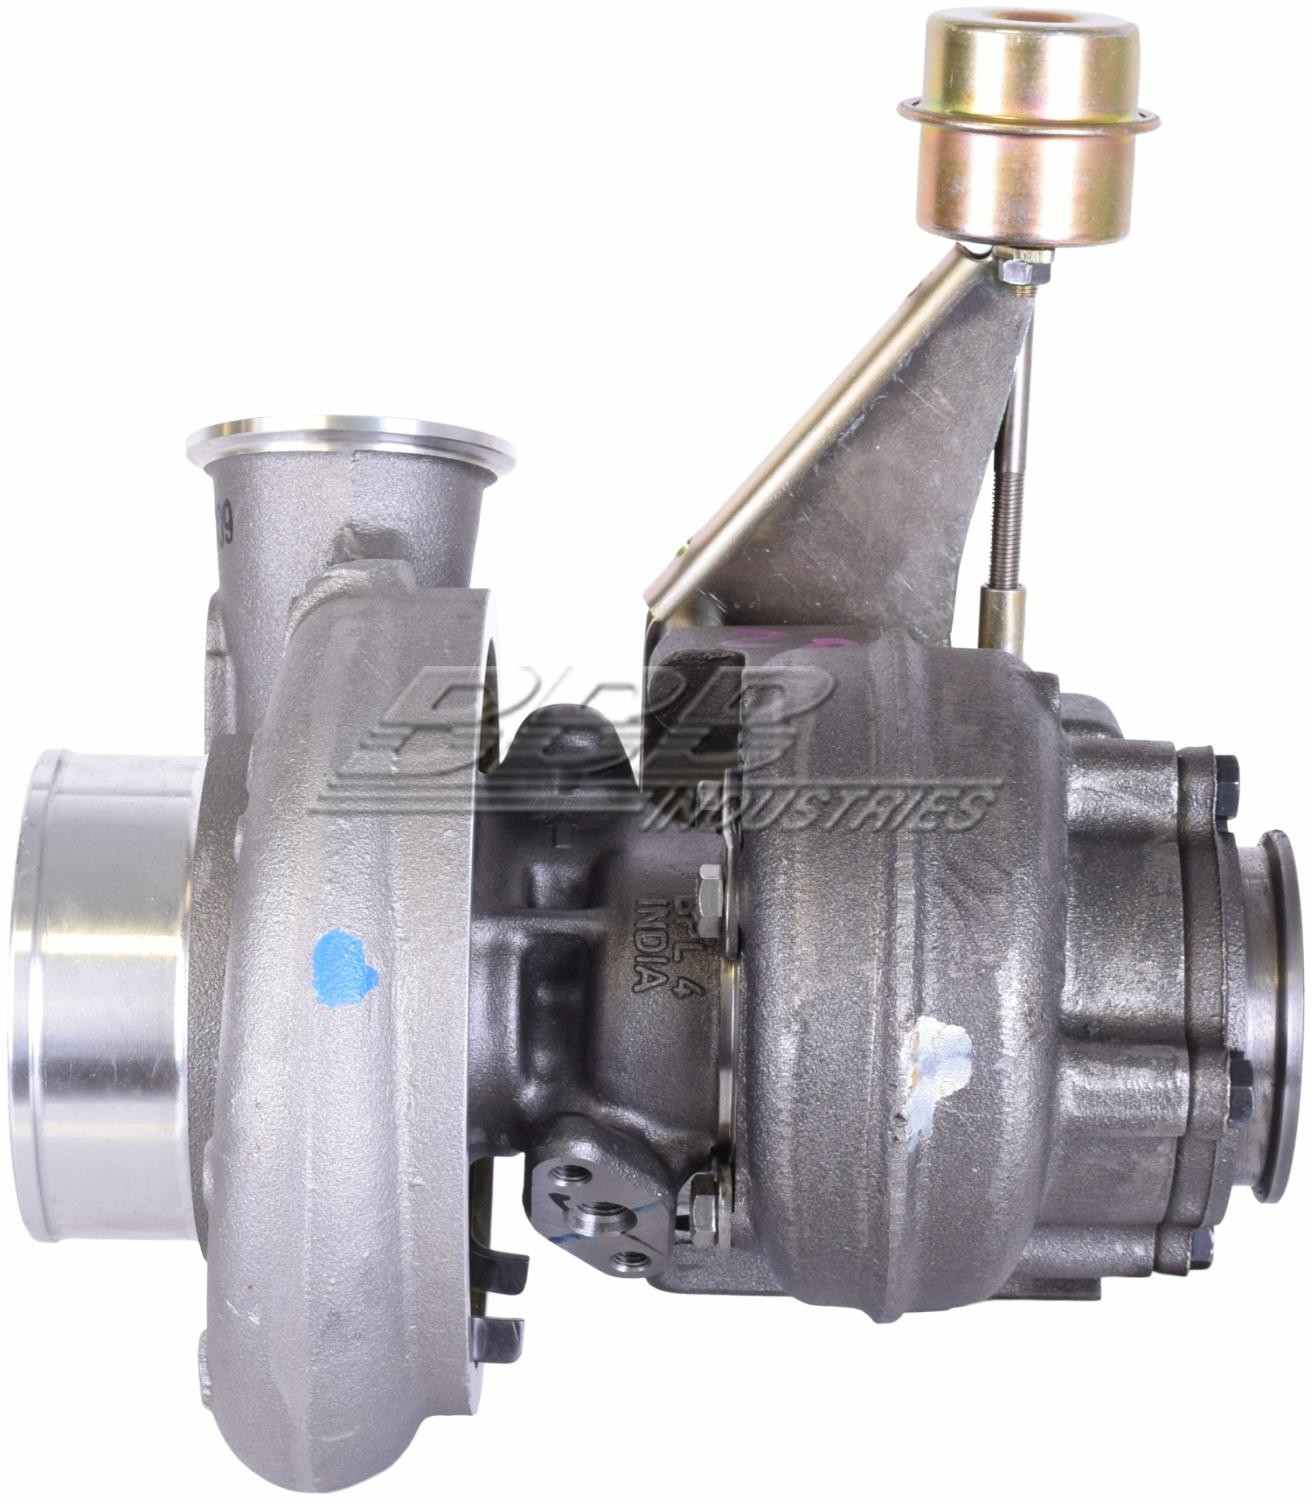 OE-TurboPower Remanufactured Turbocharger  top view frsport D2007